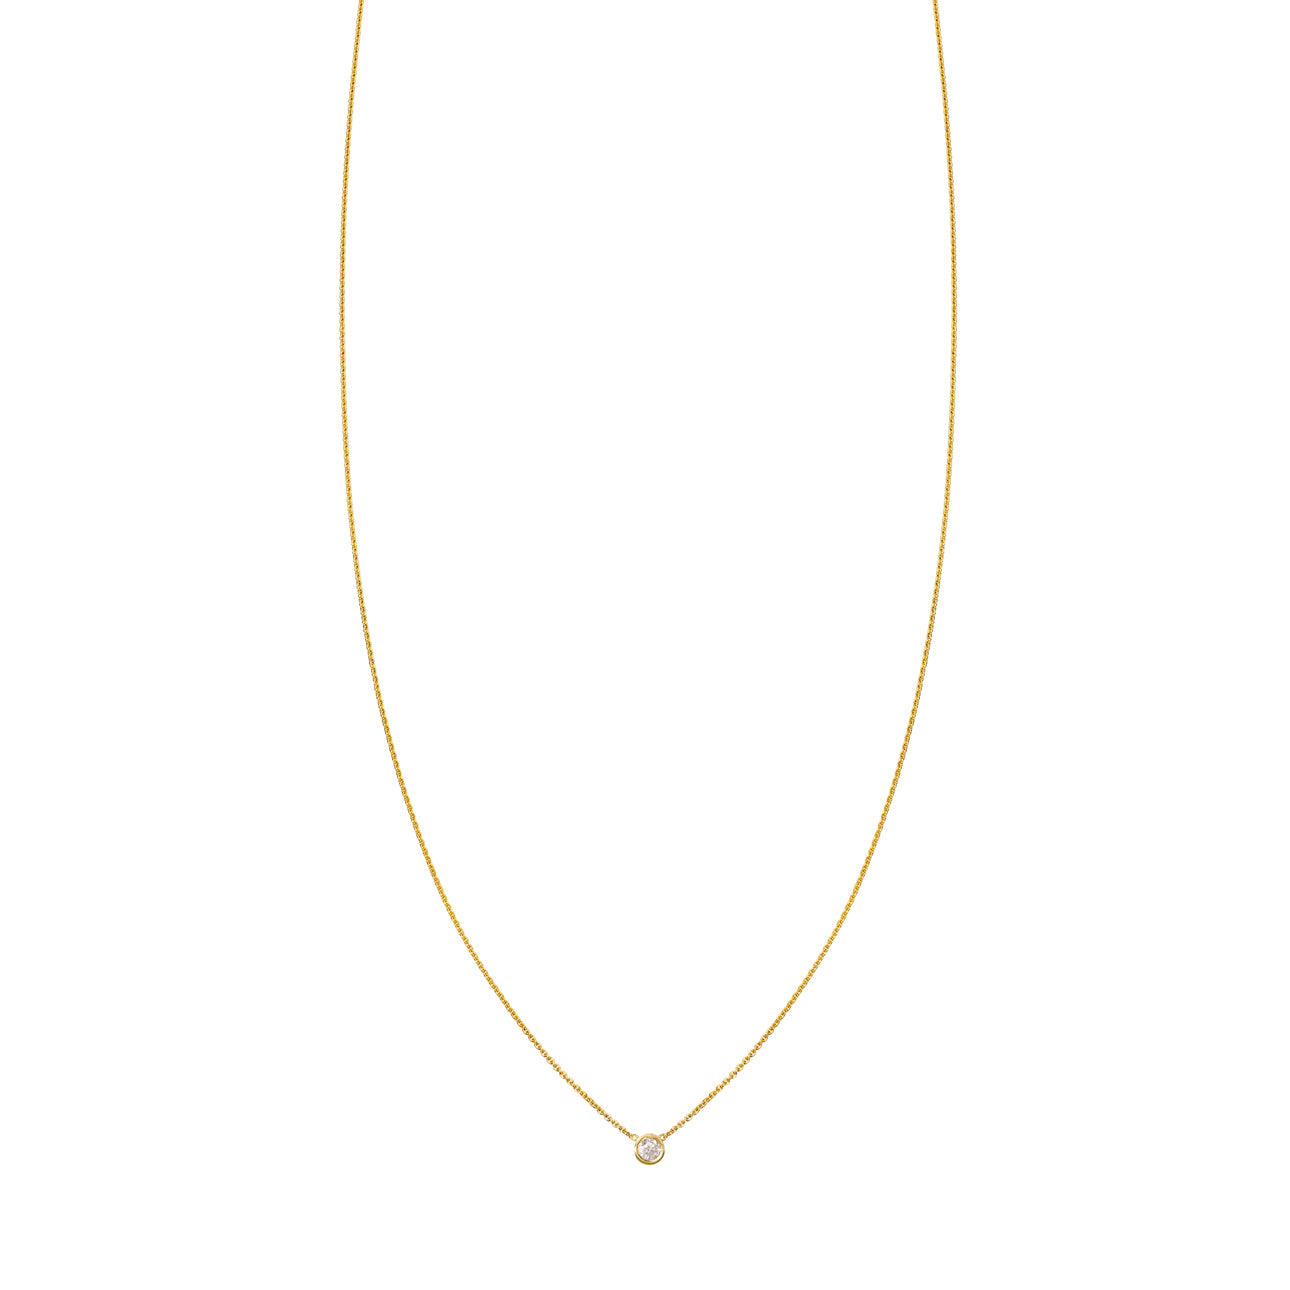 yelow gold solitaire diamond necklace